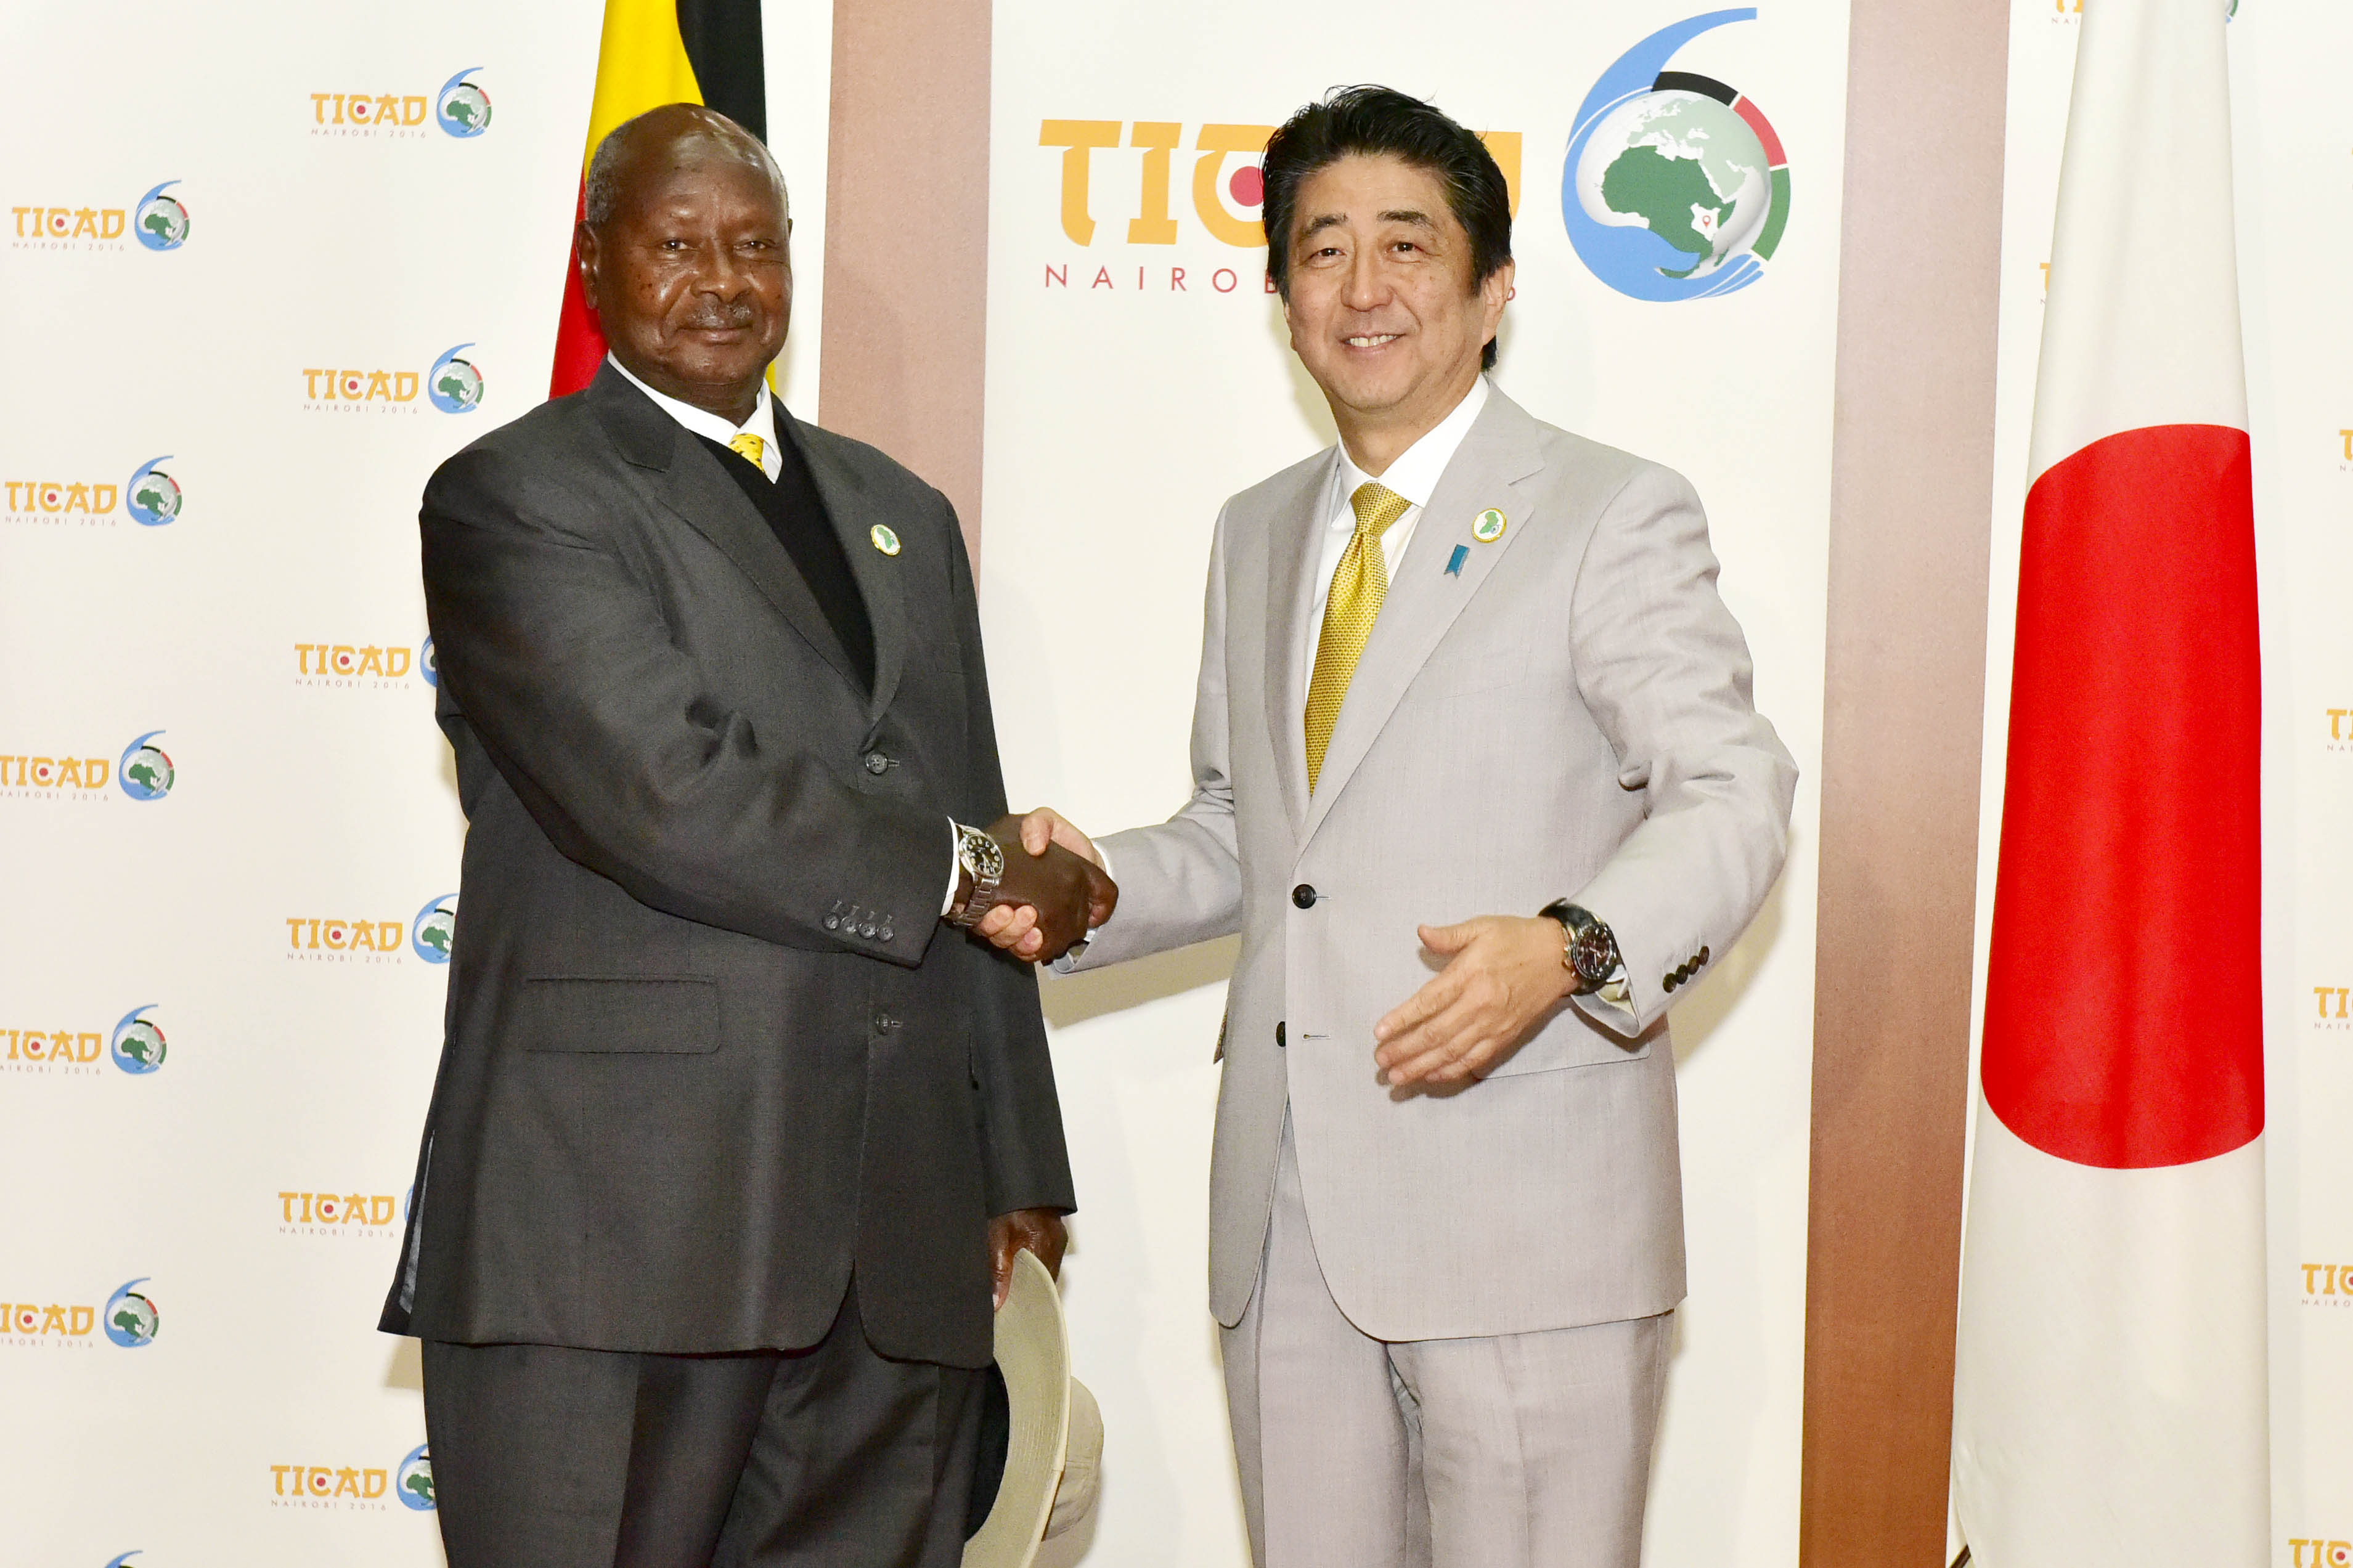 The President Yoweri Kaguta Museveni shakes hands with the Prime Minister of Japan Abey Chinzo shortly after their meeting at the on going Tokyo International Conference on African Development at Kenya International Conference Centre in Nairobi , Kenya on Sunday 28th August 2016.